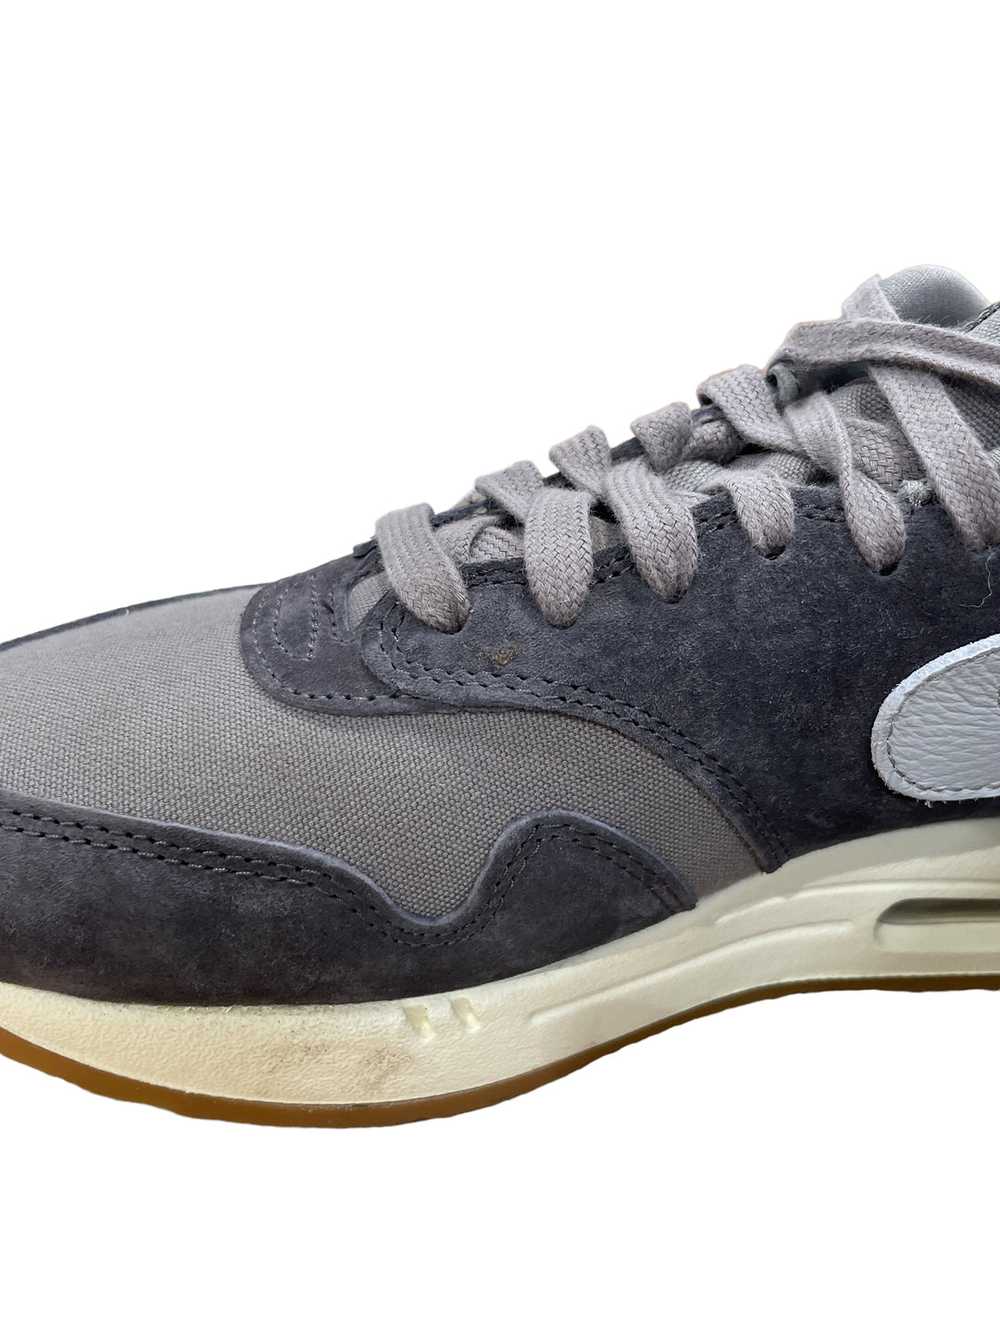 NIKE/Low-Sneakers/US 9/Suede/GRY/AIR MAX 1 - image 5